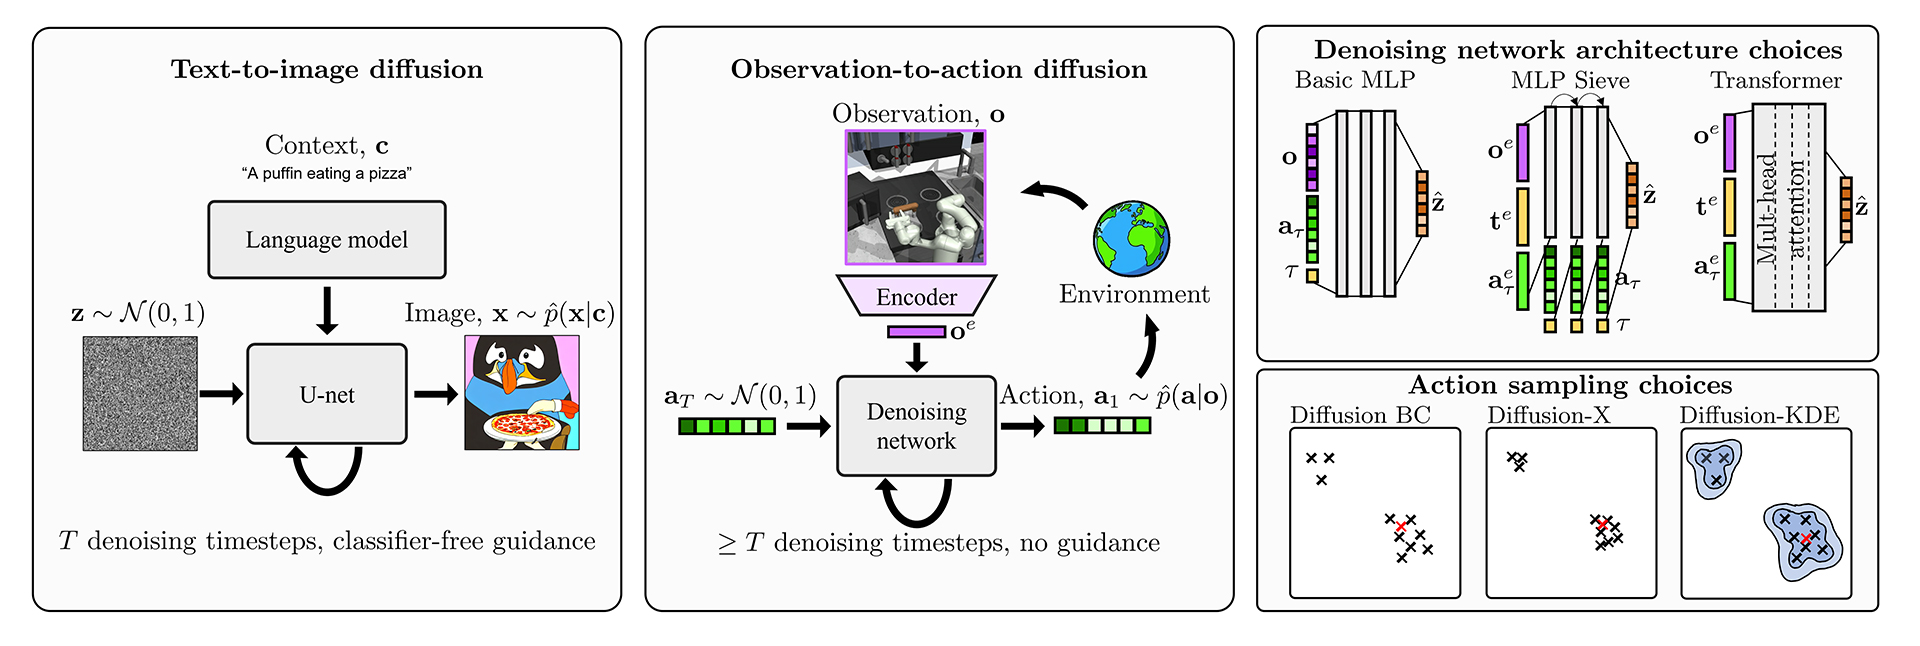 An overview of our method, providing a side-by-side comparison of text-to-image diffusion, with observation-to-action diffusion. On the right are diagrams of the different denoising architectures tested, as well an illustration of the sampling schemes explored.